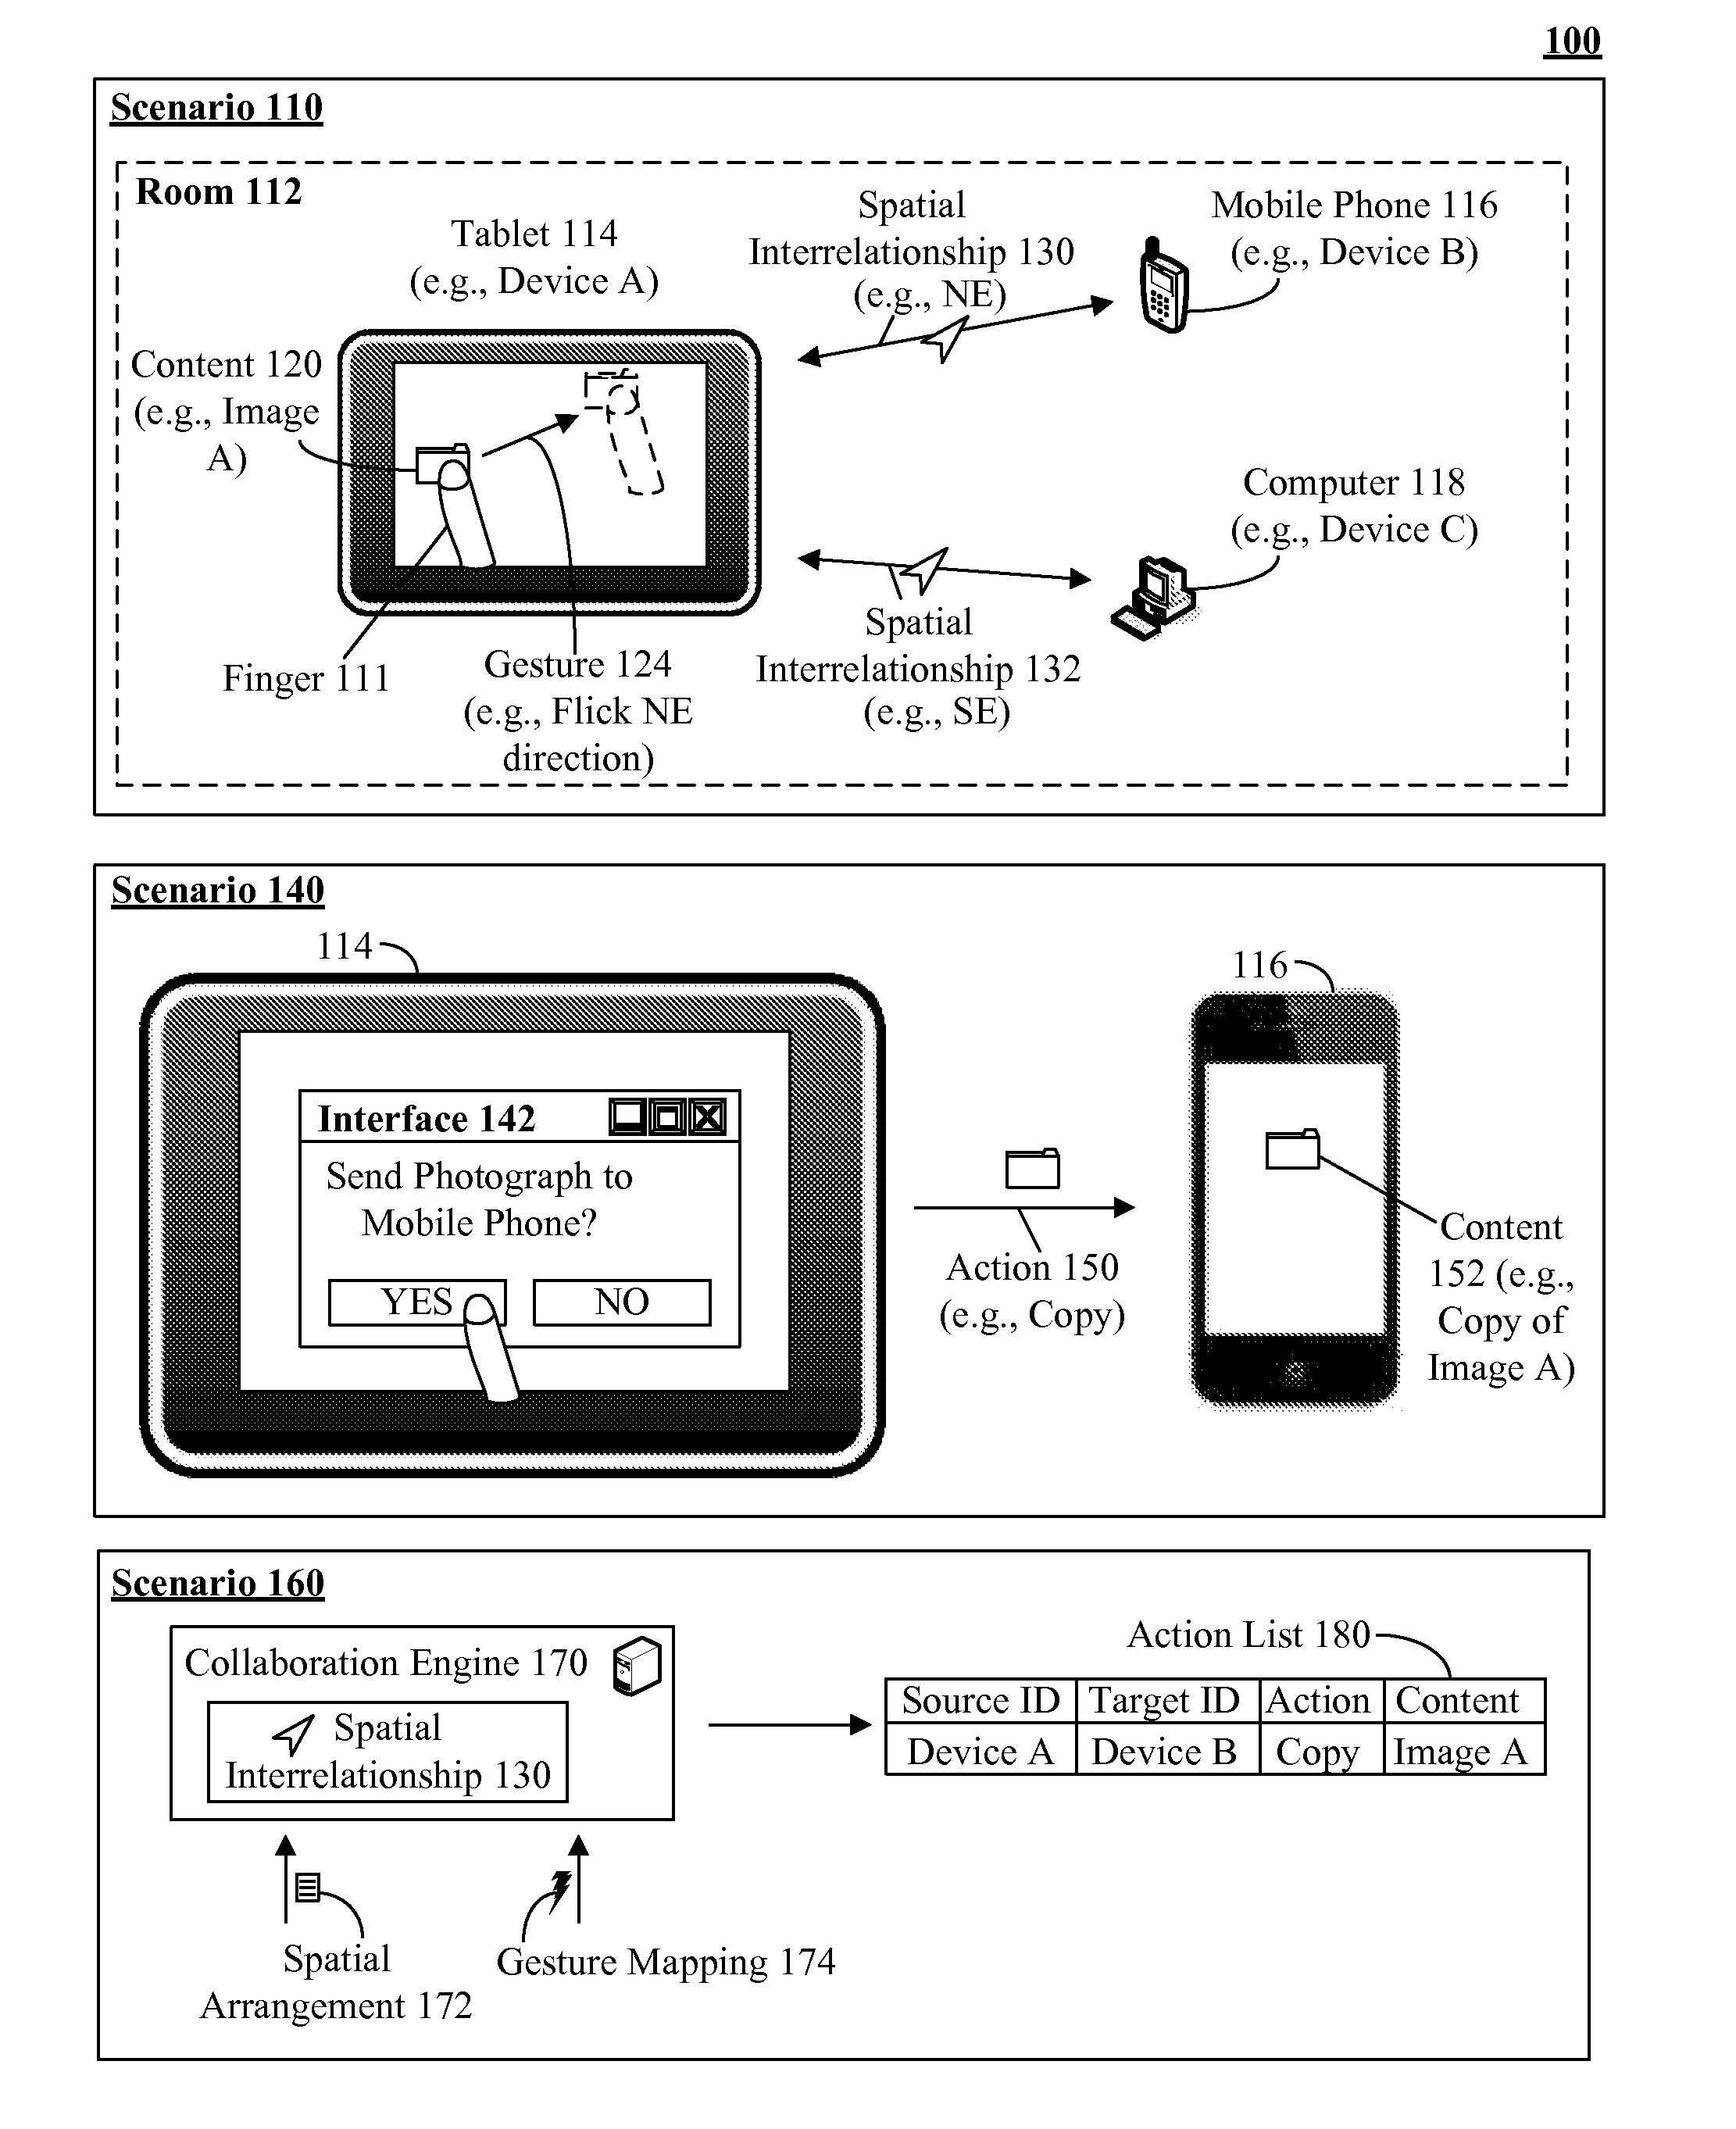 Enabling gesture driven content sharing between proximate computing devices